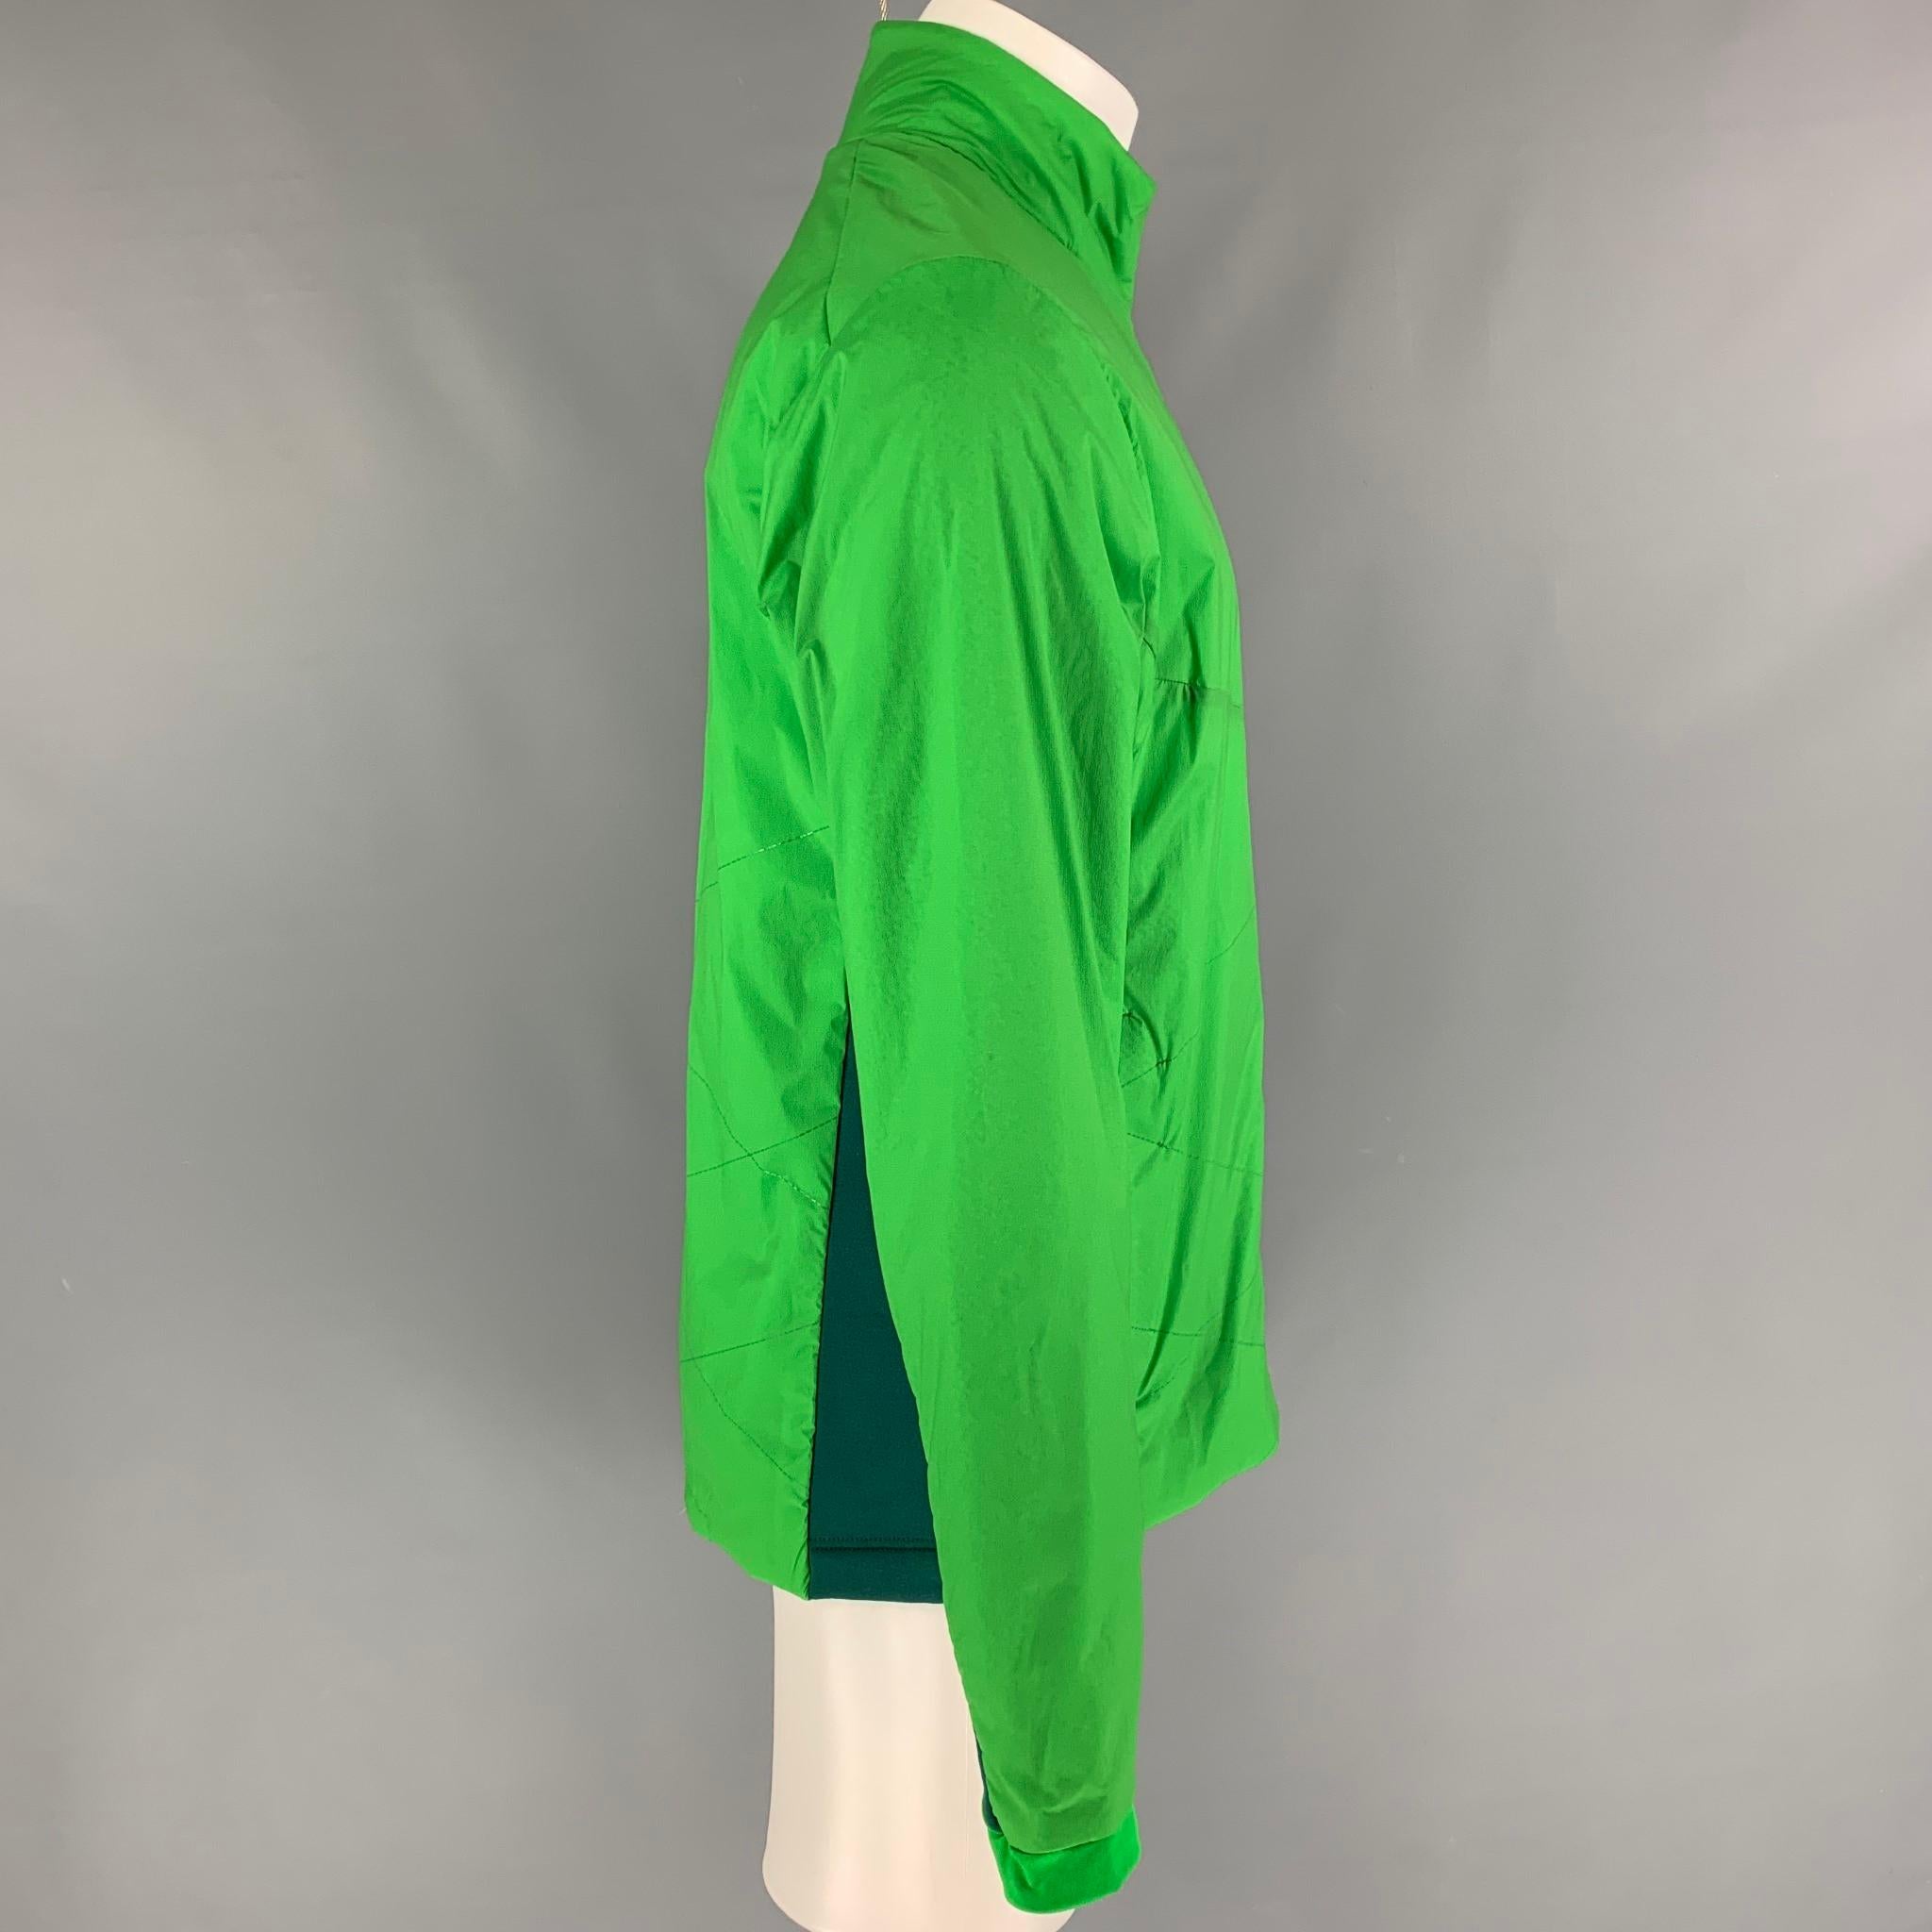 KJUS jacket comes in a green two toned nylon blend featuring a high collar, slit pockets, and a zip up closure. 

New With Tags. 
Marked: M

Measurements:

Shoulder: 19 in.
Chest: 42 in.
Sleeve: 28 in.
Length: 29 in. 
